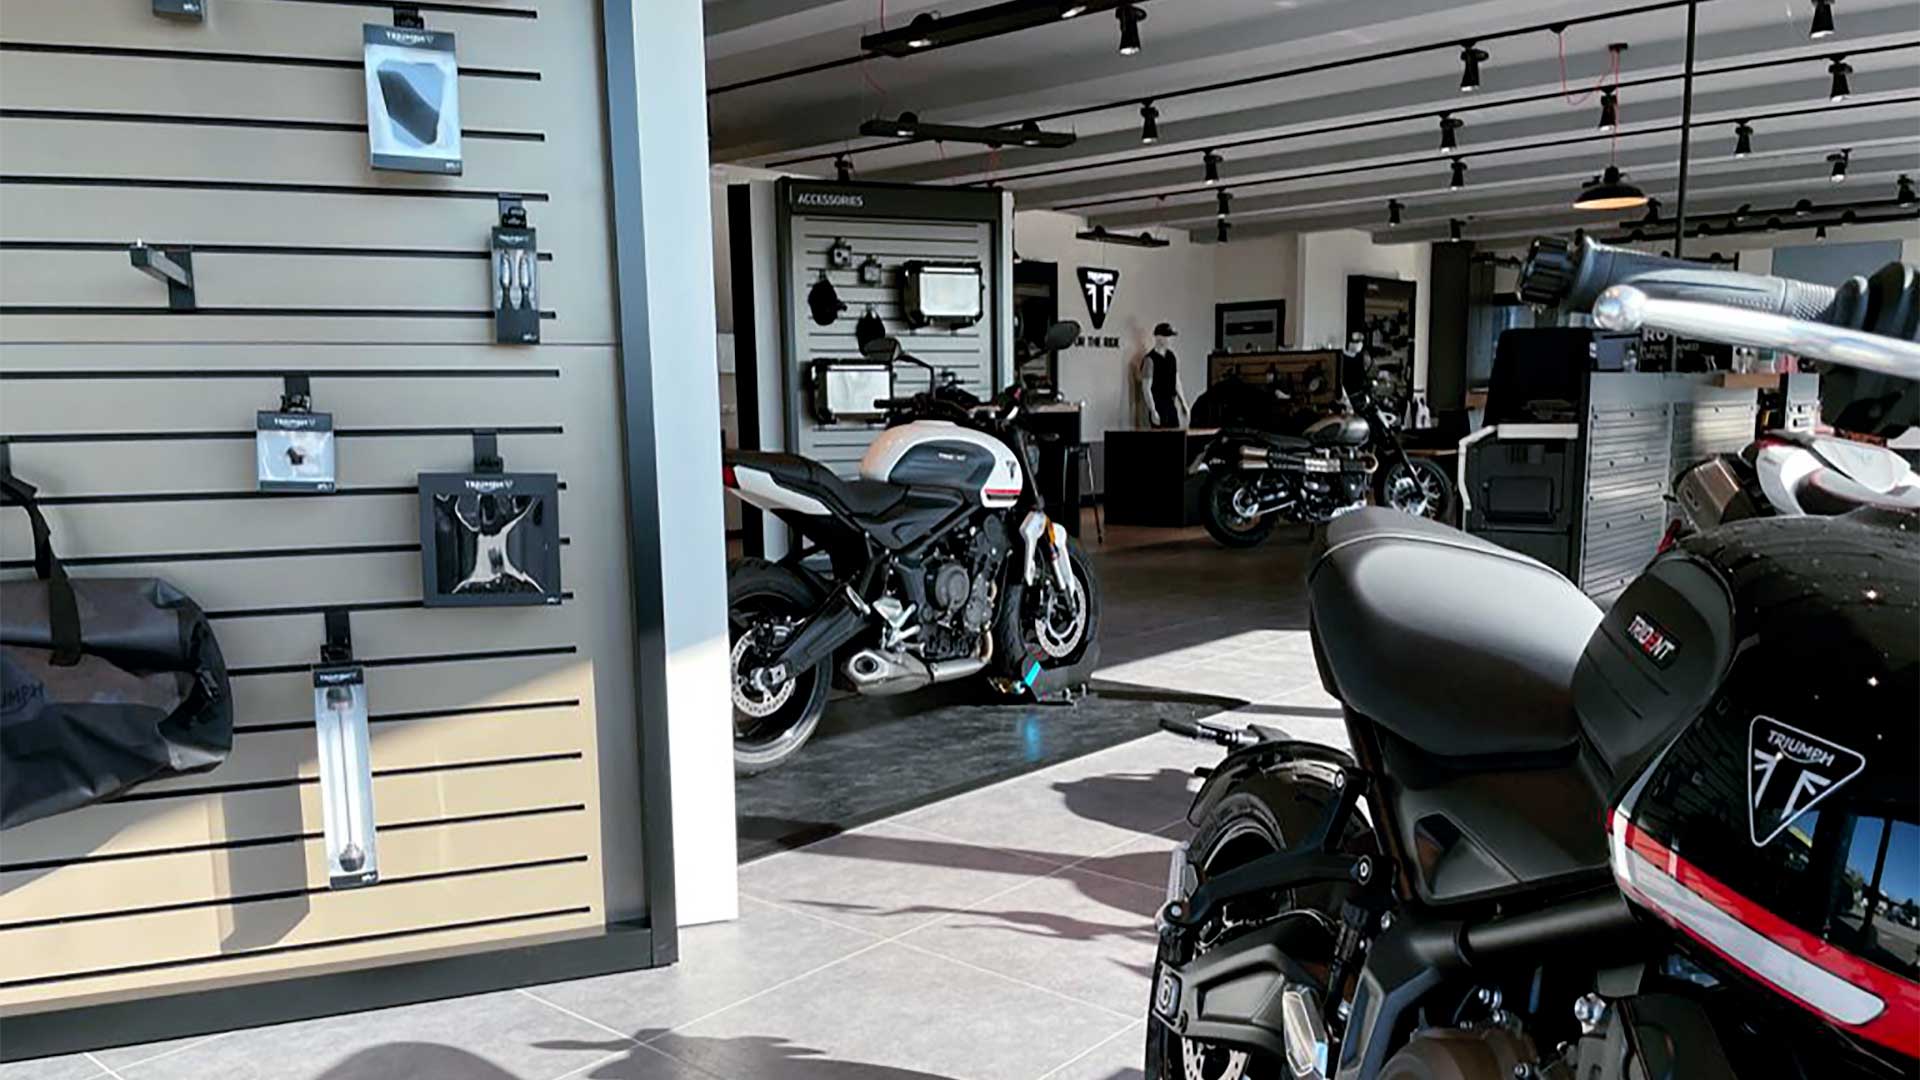 Triumph motorcycles dealership in Bologna